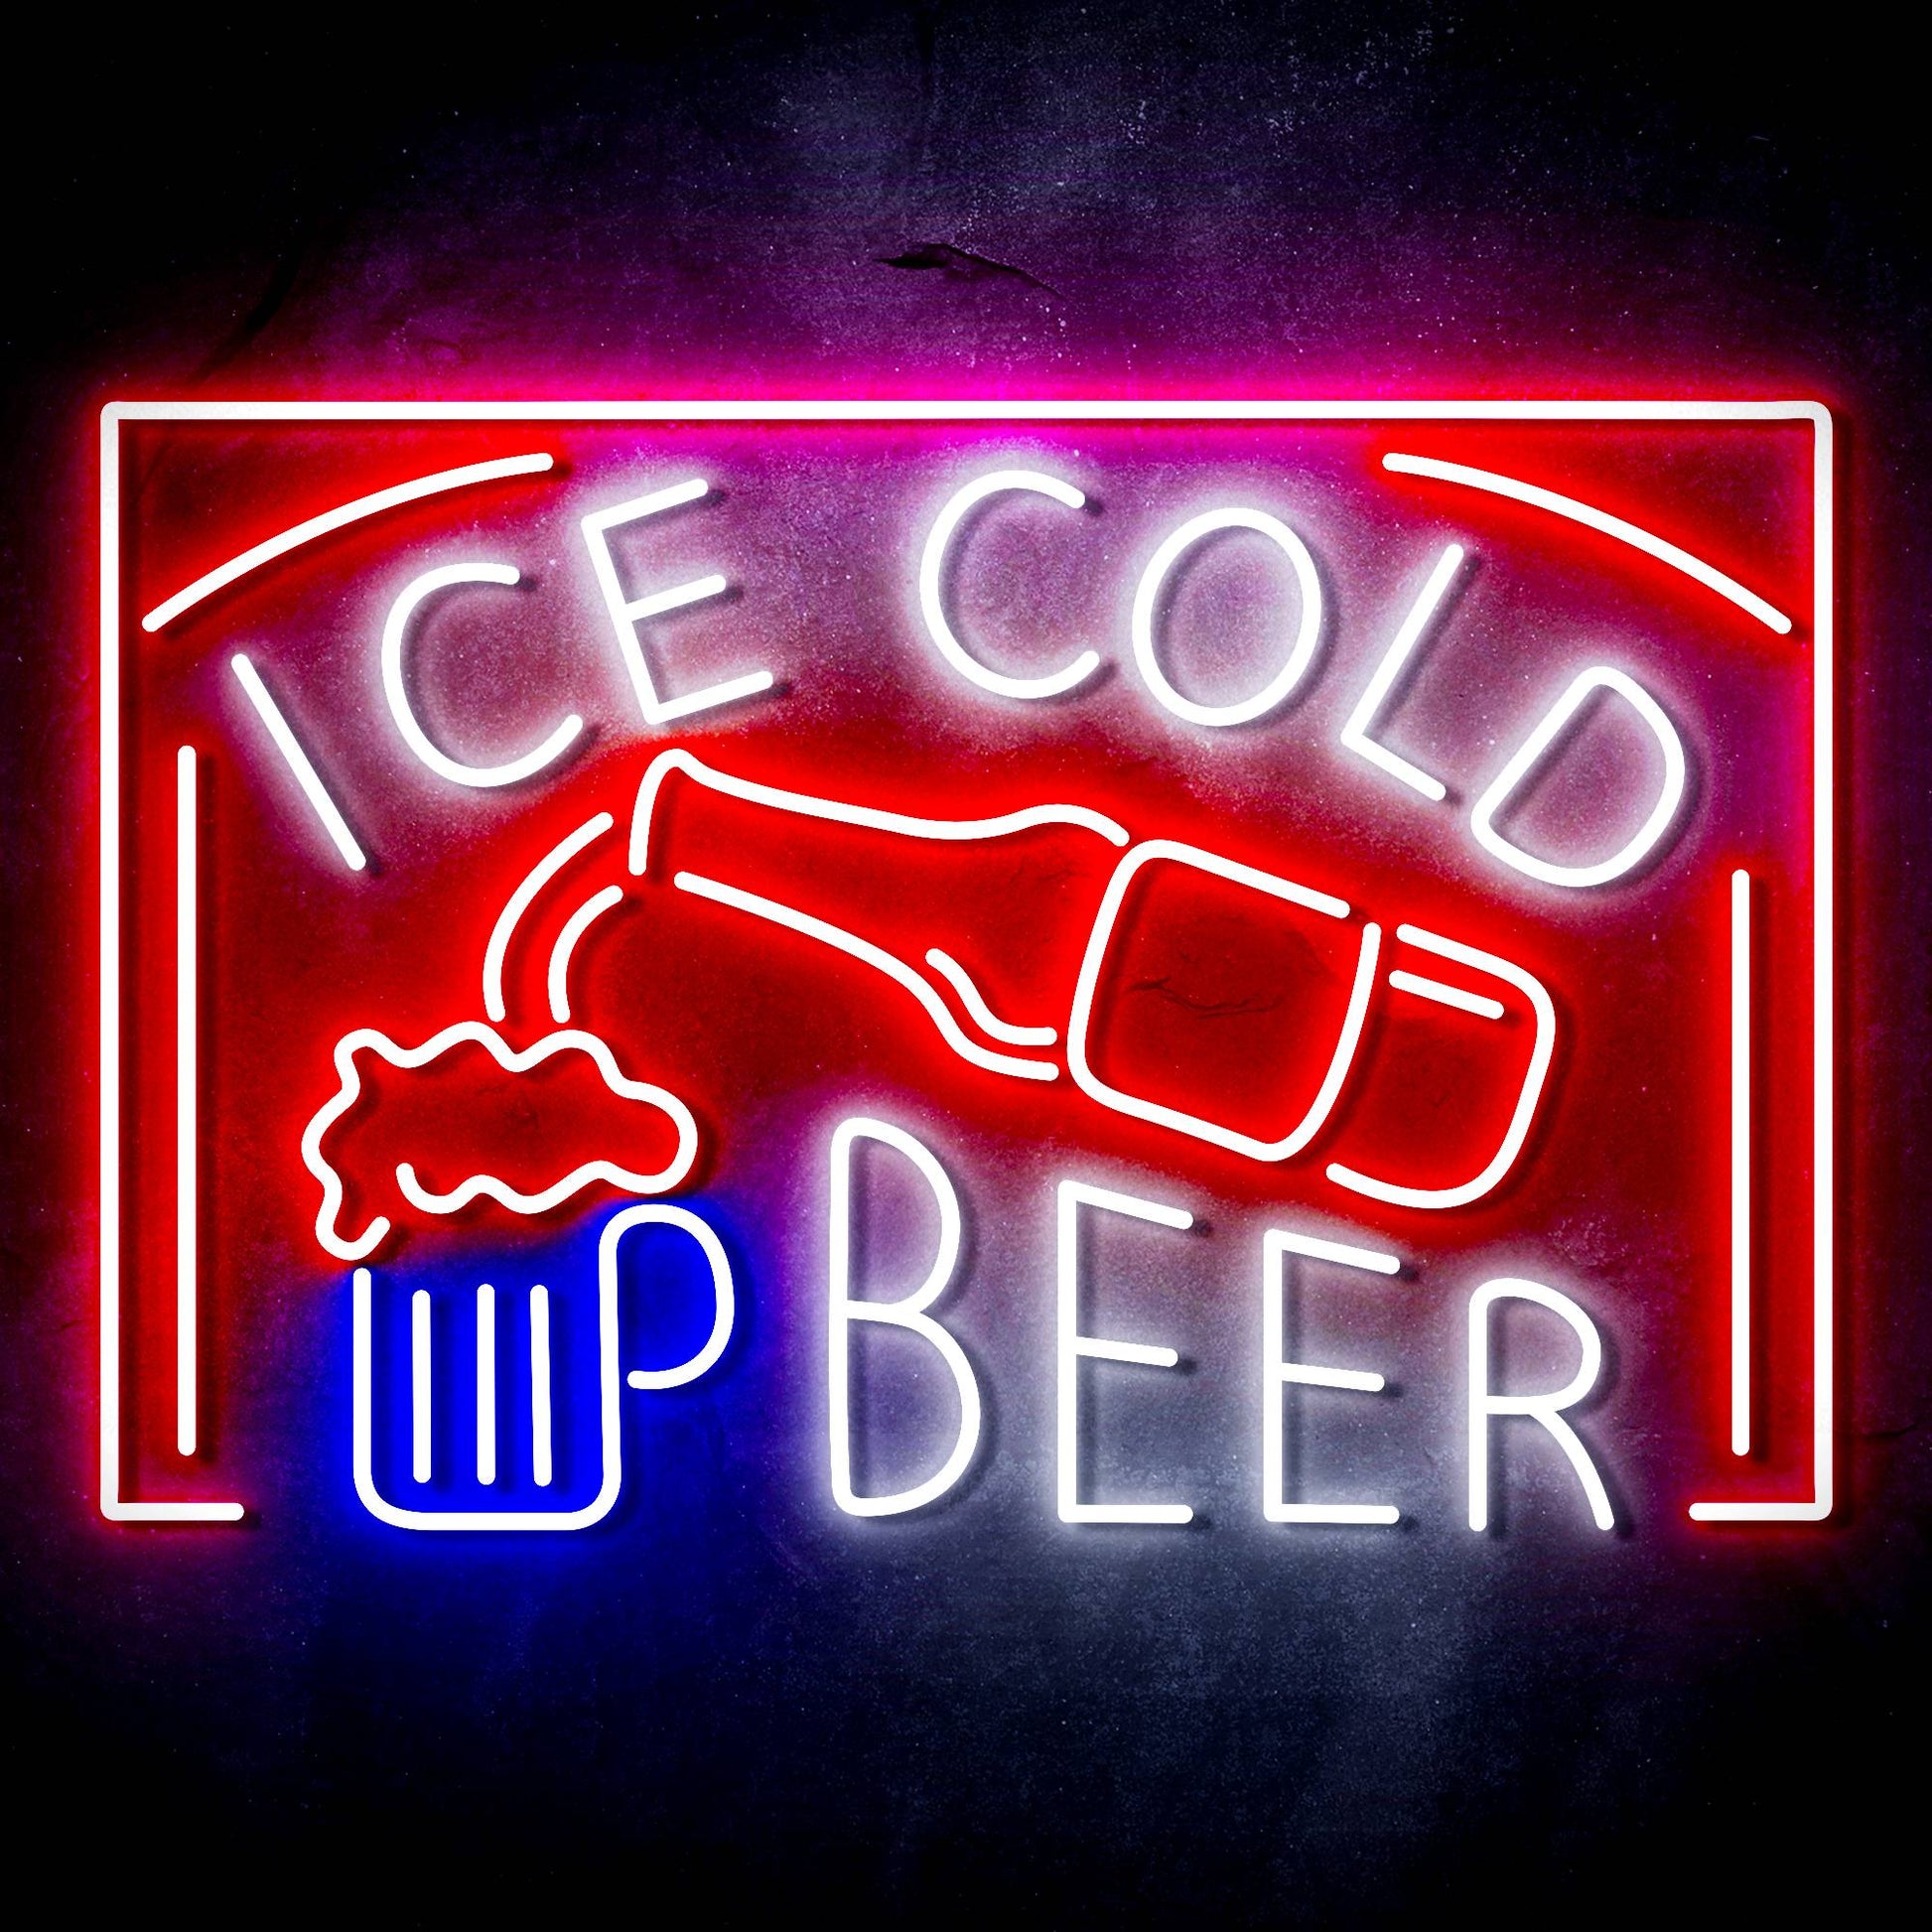 Cold Beer - Neon Signs Depot